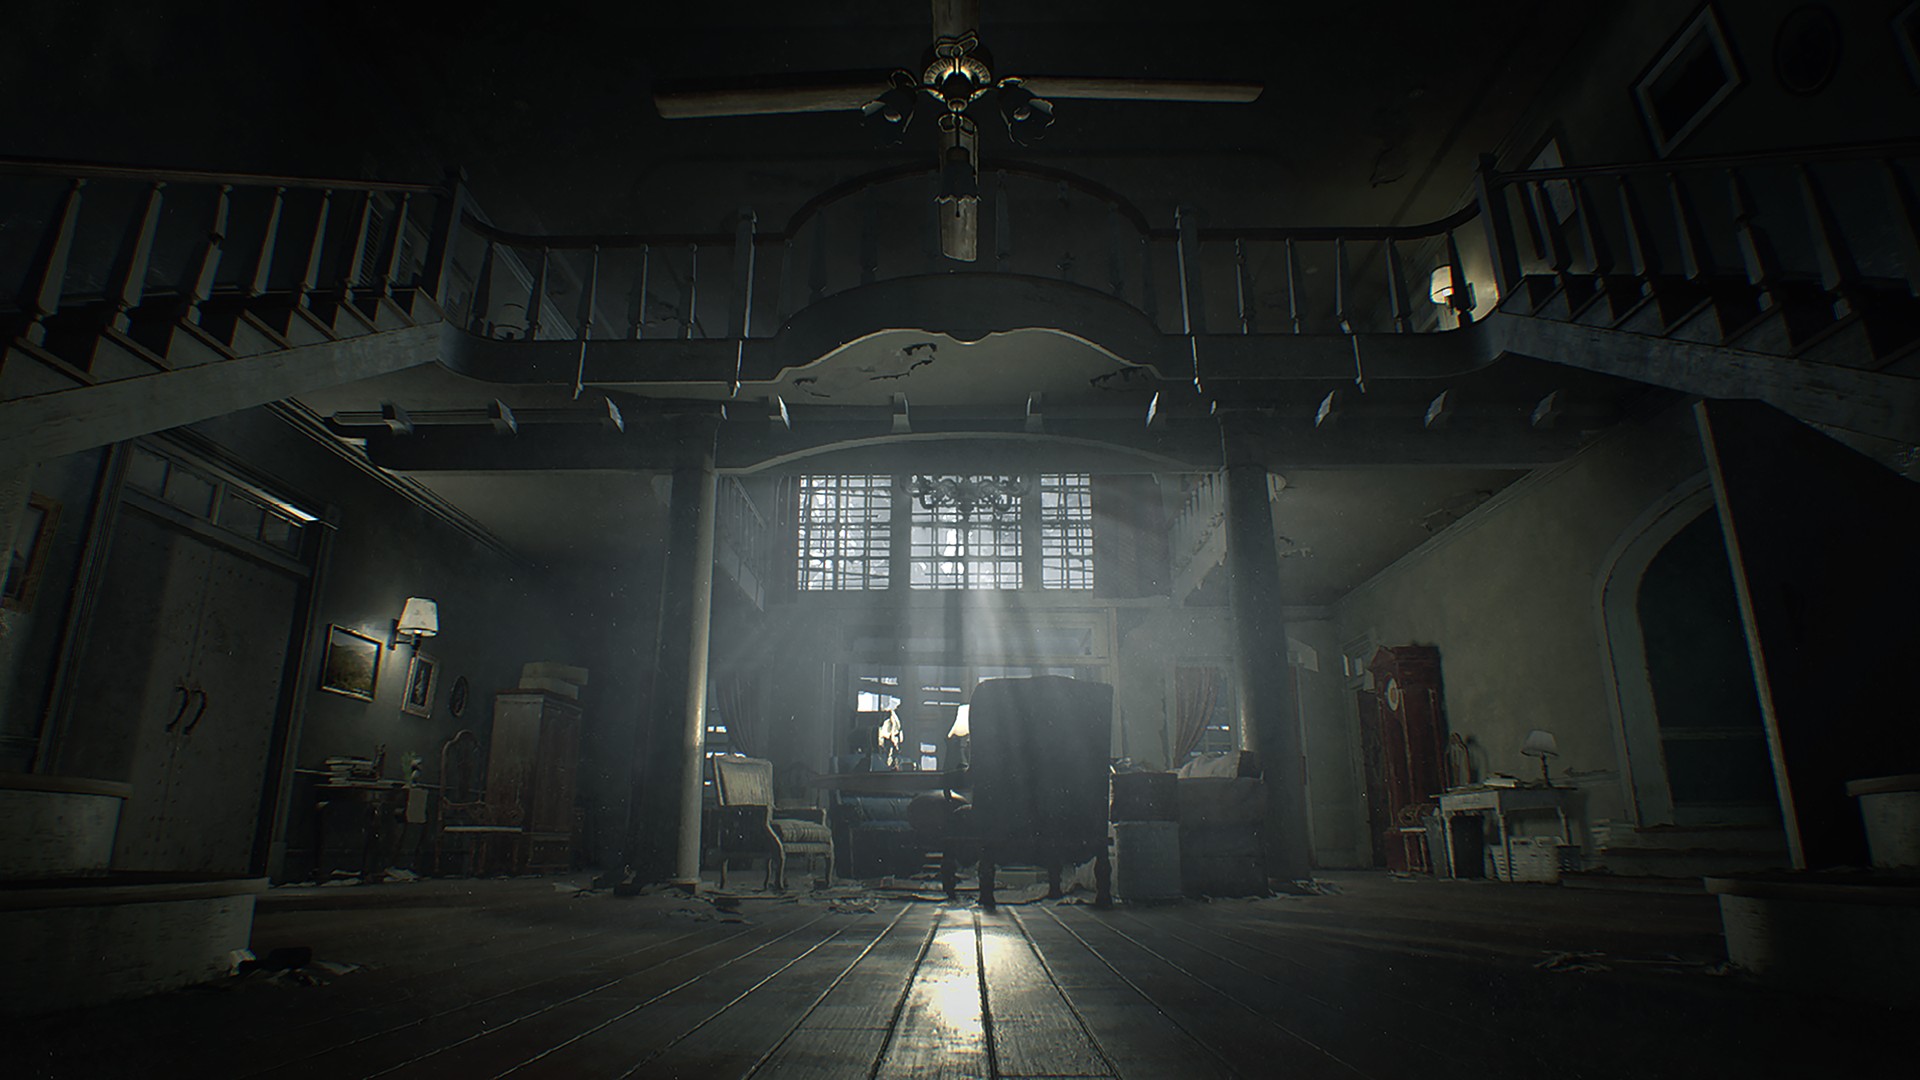 resident evil 7 and village in fully immersive vr on pc  Image of resident evil 7 and village in fully immersive vr on pc